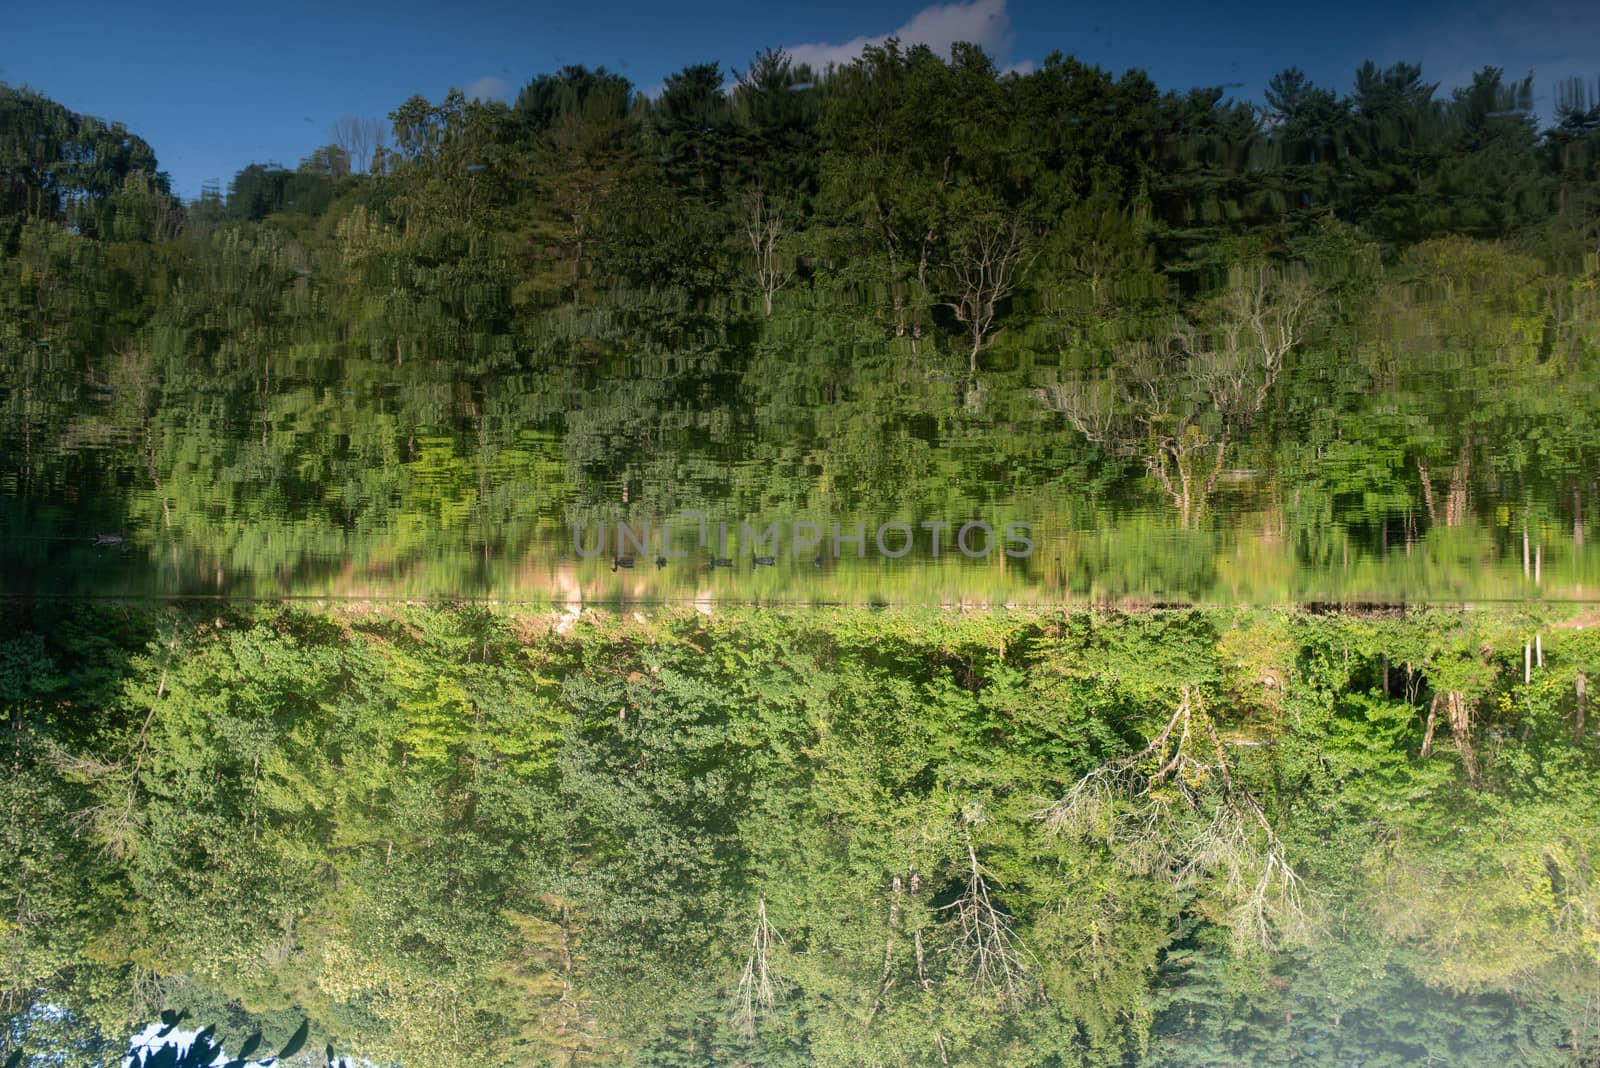 lush green foliage reflected in upside down image of woodland lake. Full frame colorful image with a family of ducks swimming across the center.